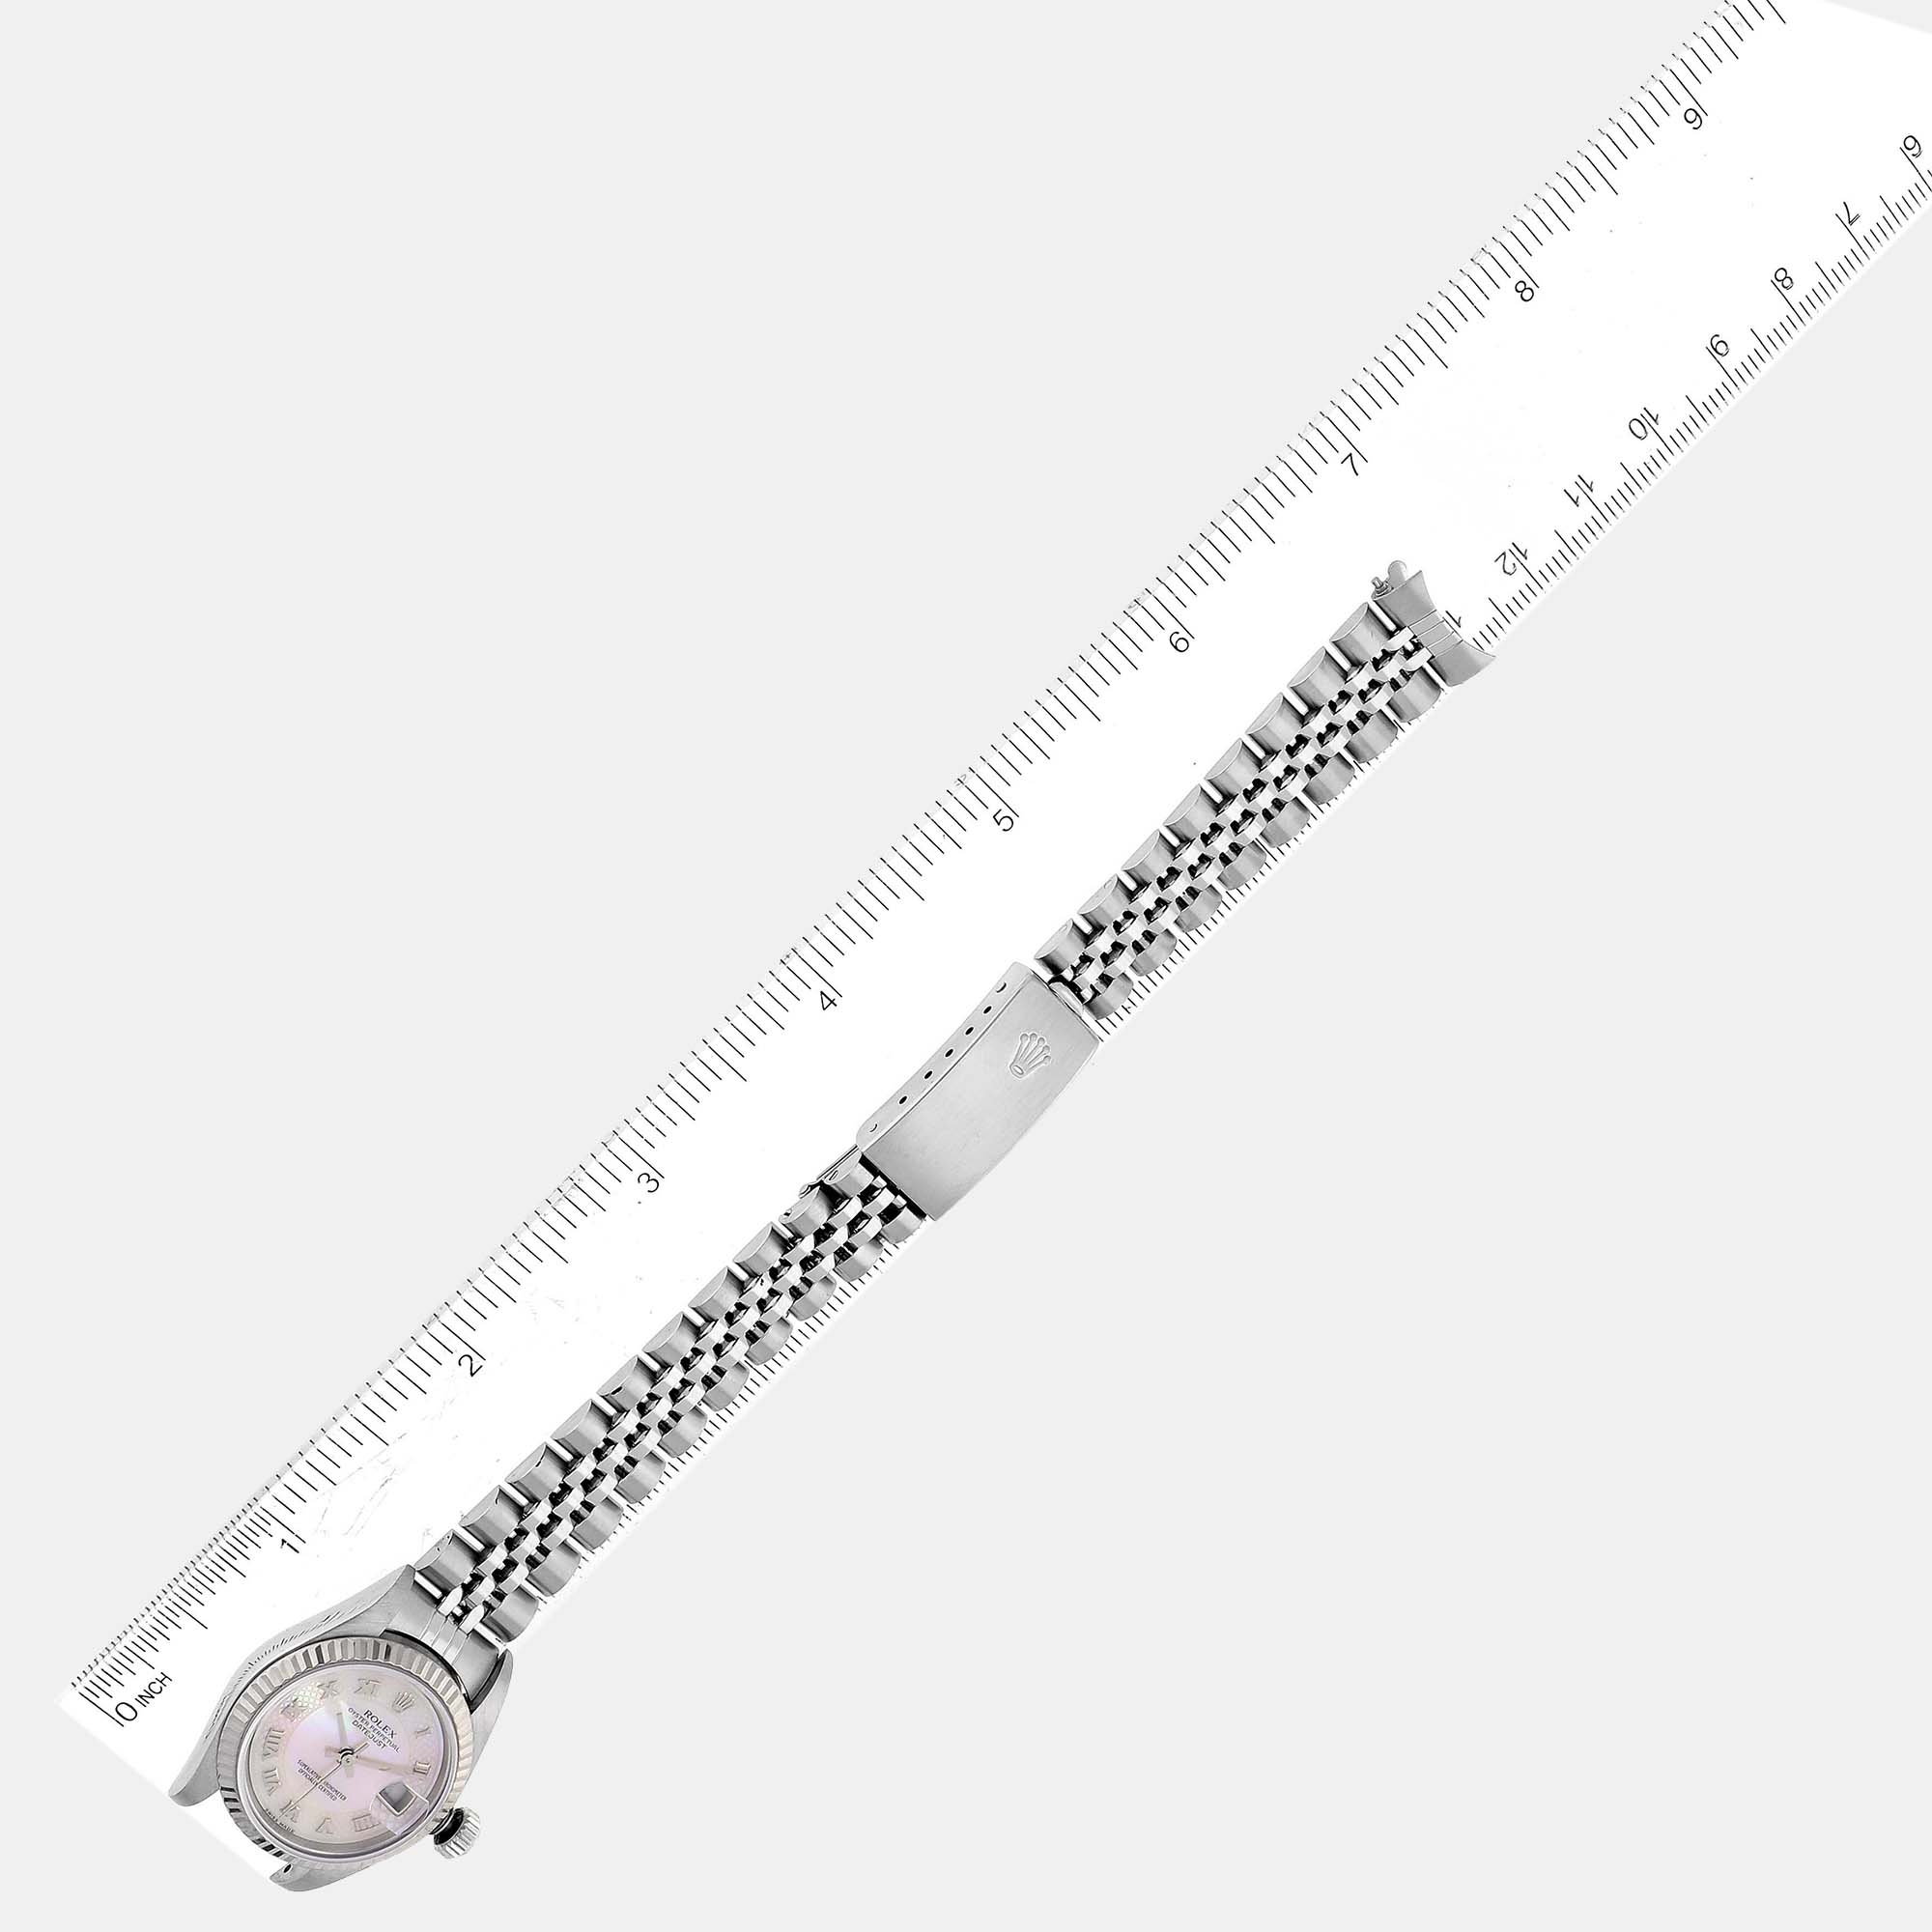 Rolex Datejust Steel White Gold Decorated Mother Of Pearl Ladies Watch 79174 26 Mm